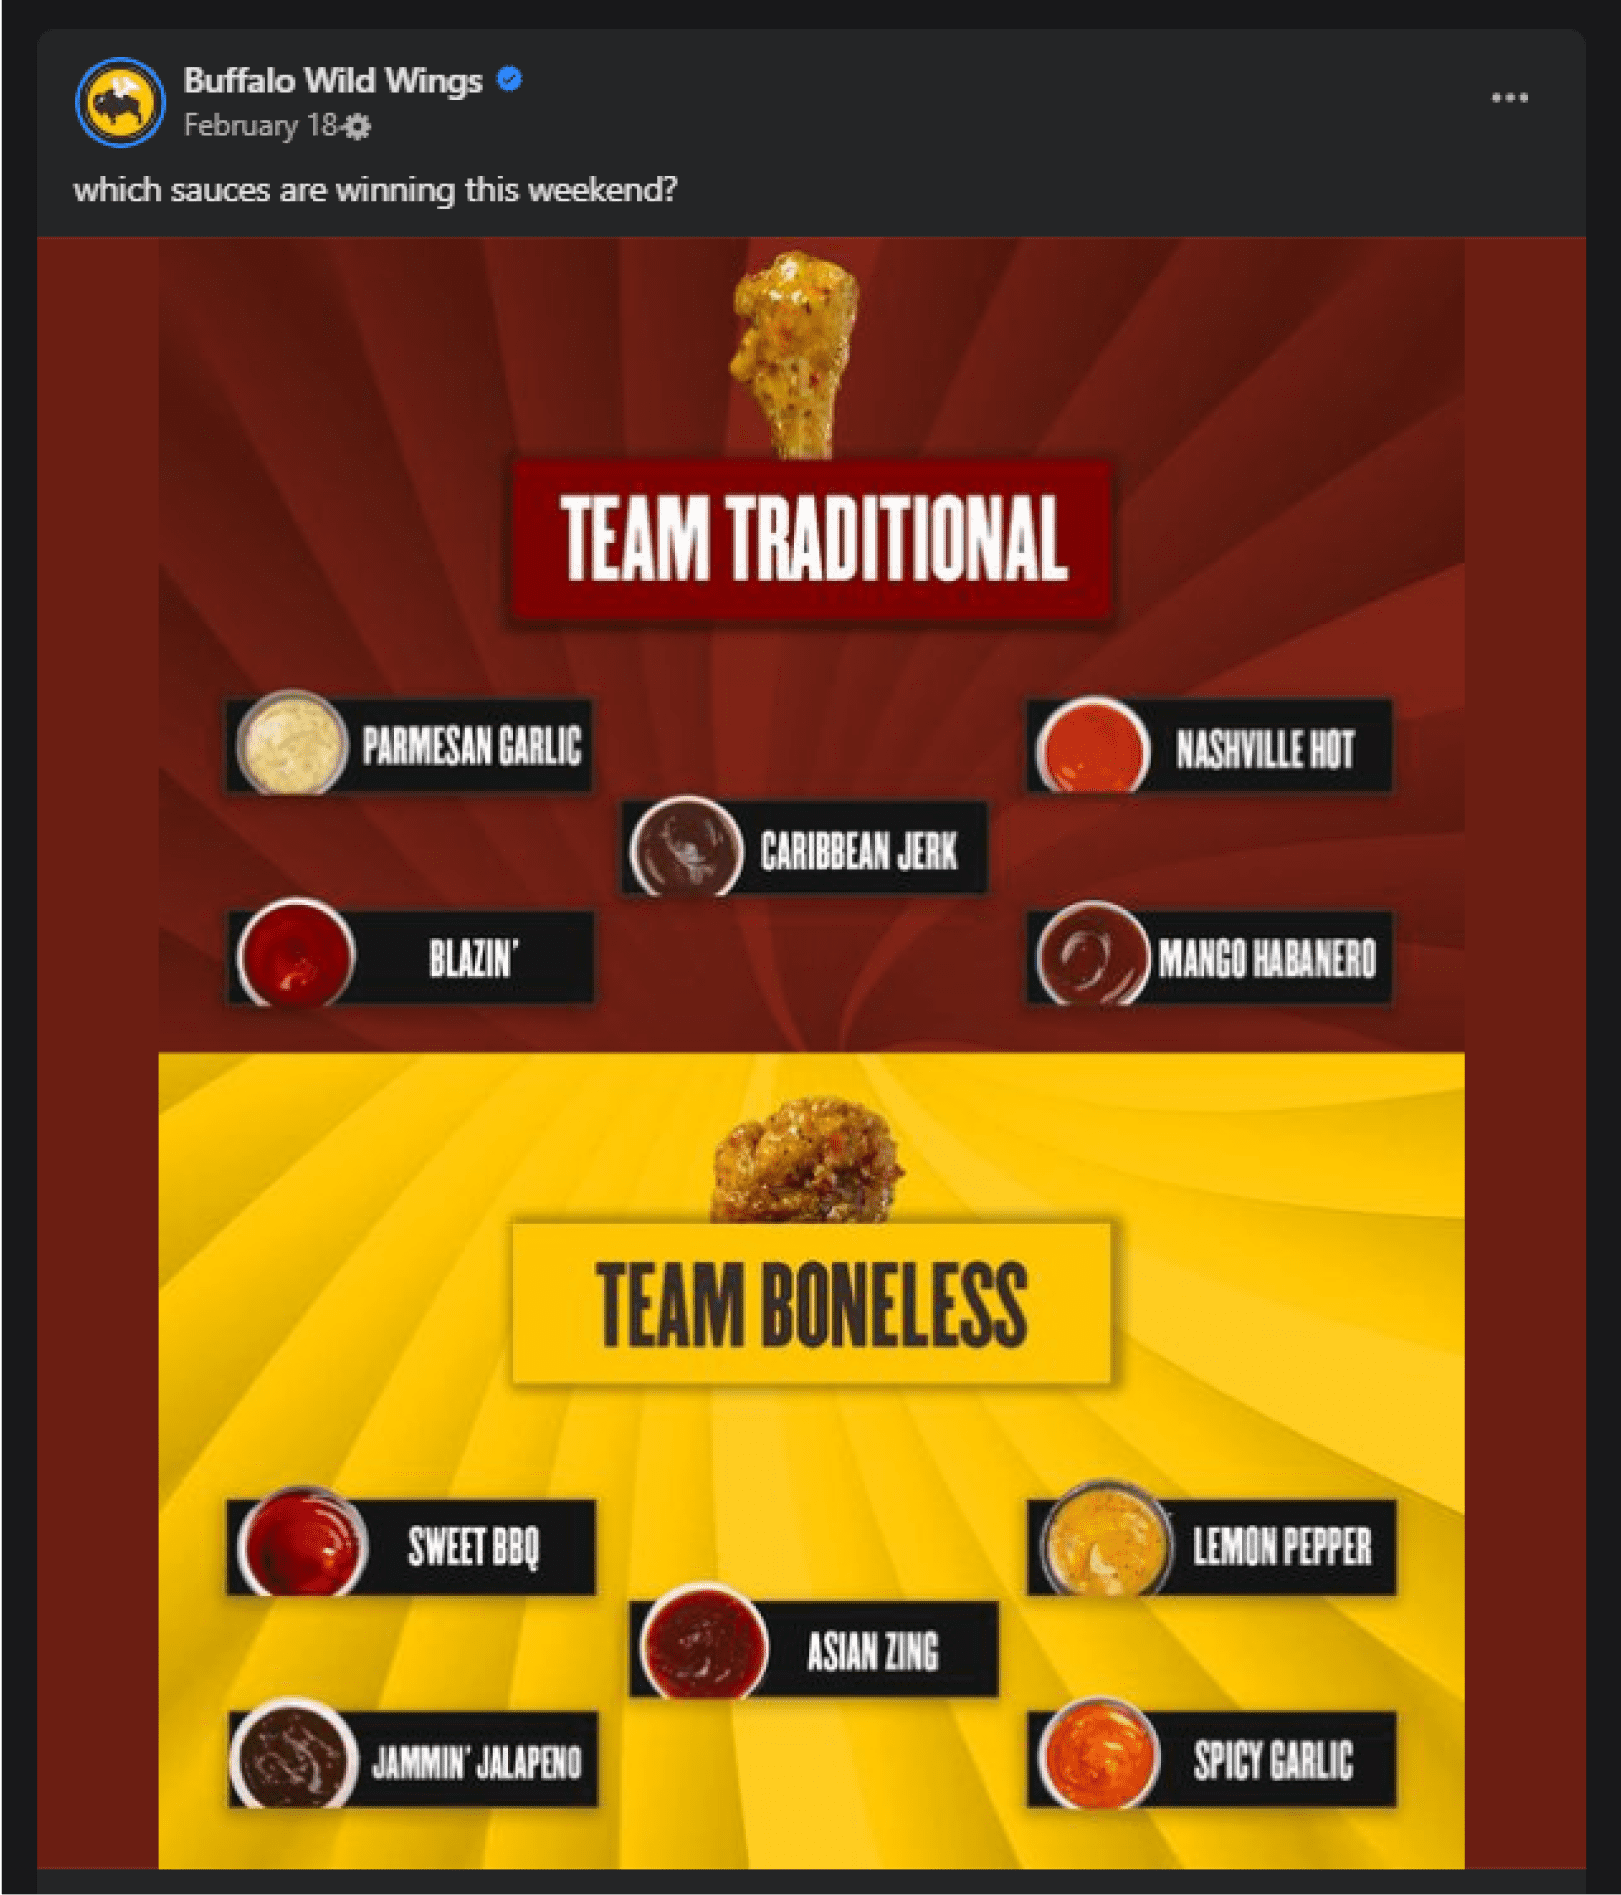 Buffalo Wild Wings Facebook post with a playful 'Team Traditional vs. Team Boneless' chicken wings poll, showcasing engaging content with a variety of sauce options.